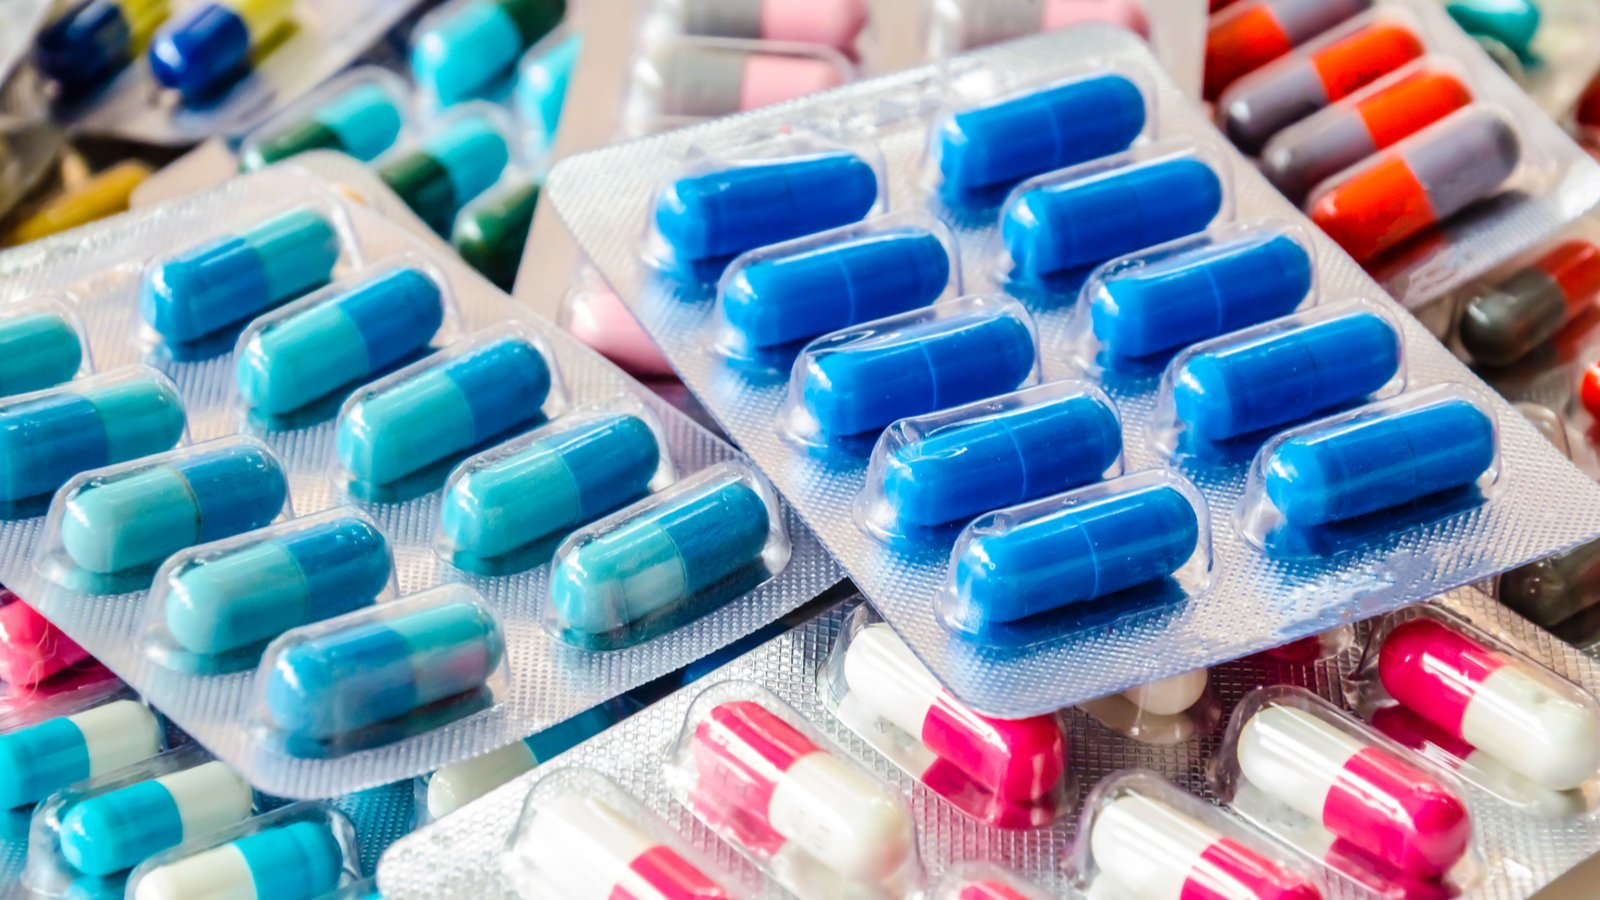 Packs of blue and pink pills are piled on top of each other representing PRAX stock.